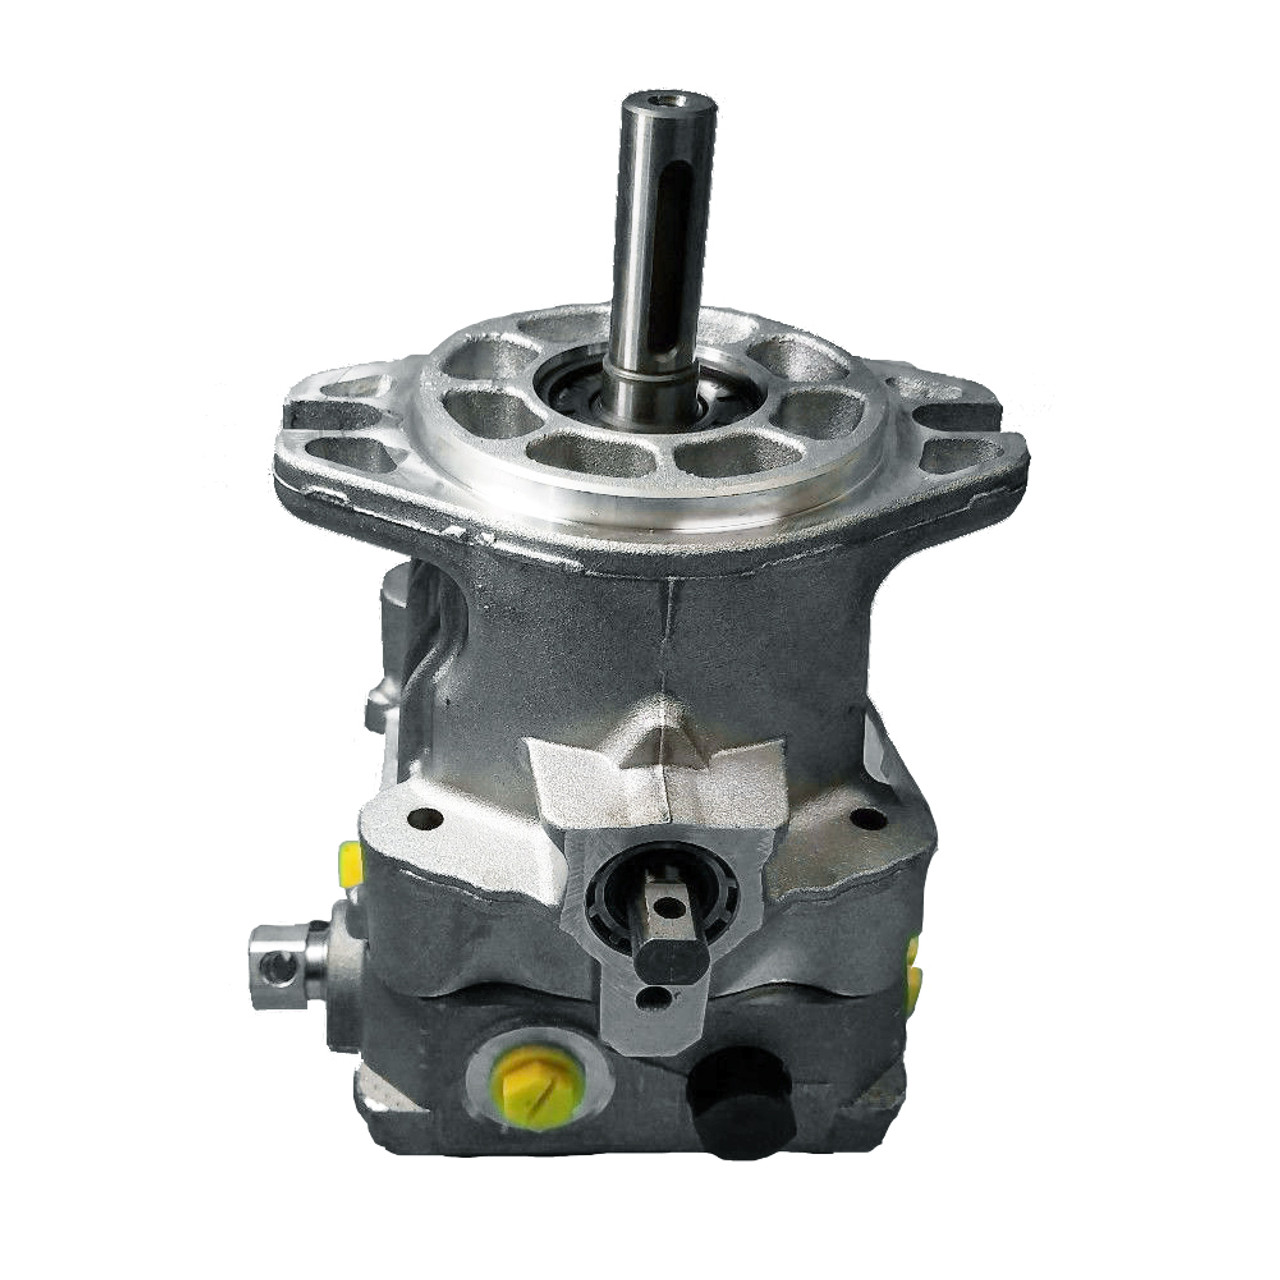 Hydro Gear Replacement Pump PG-1GCC-DY1X-XXXX / Scag Wildcat Tiger Cub Cat Mowers & Others / 482644, 13-695, BDP-10A-419